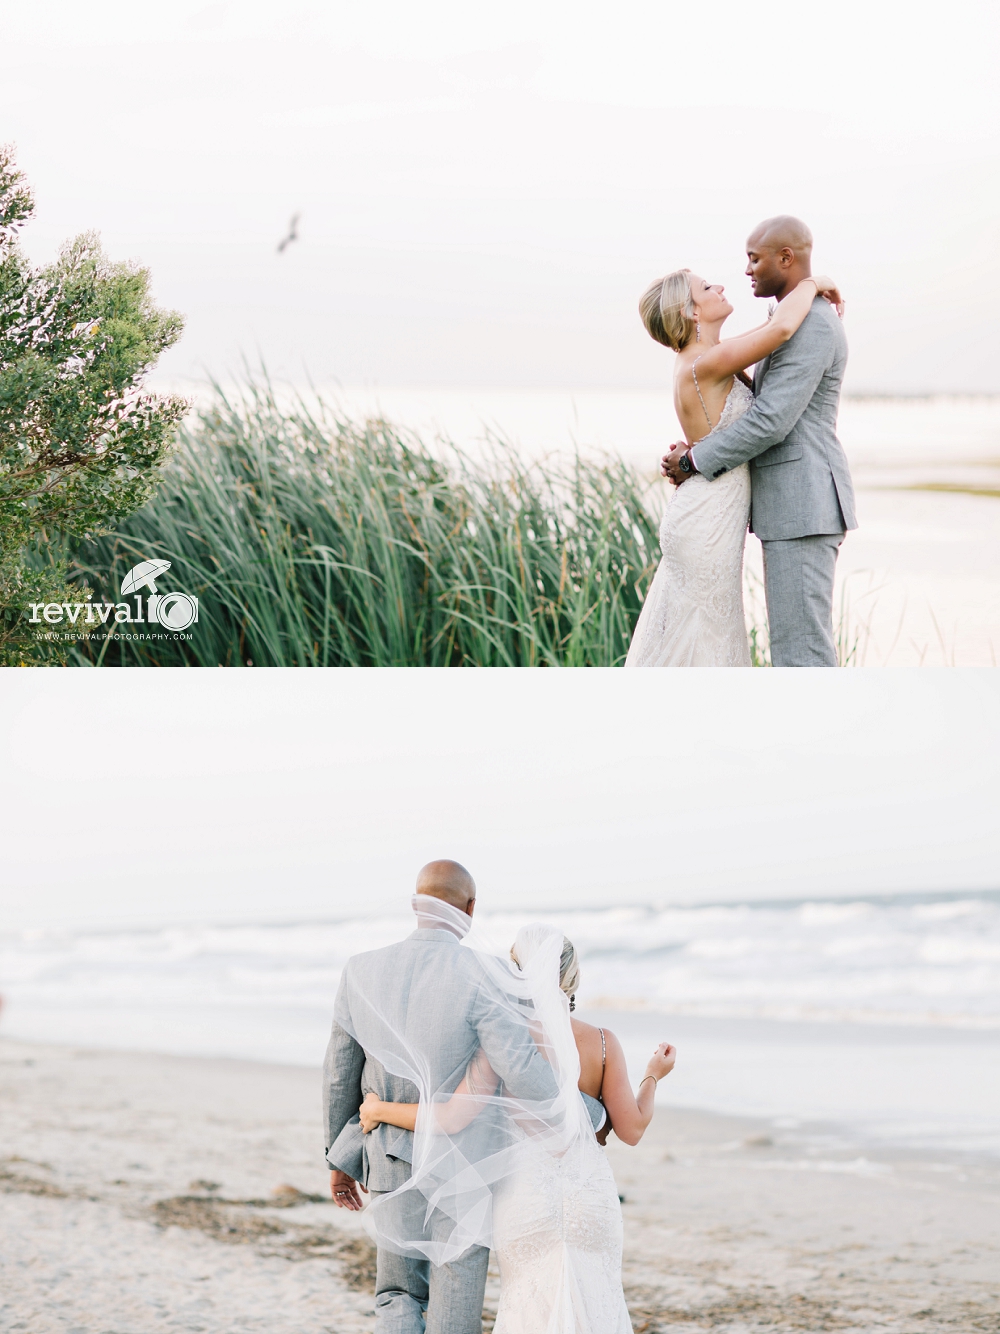 Vanessa+and+Patrick's+Destination+Wedding+Adventure+in+the+OBX+Photography+by+Revival+Photography+www.revivalphotography.jpeg